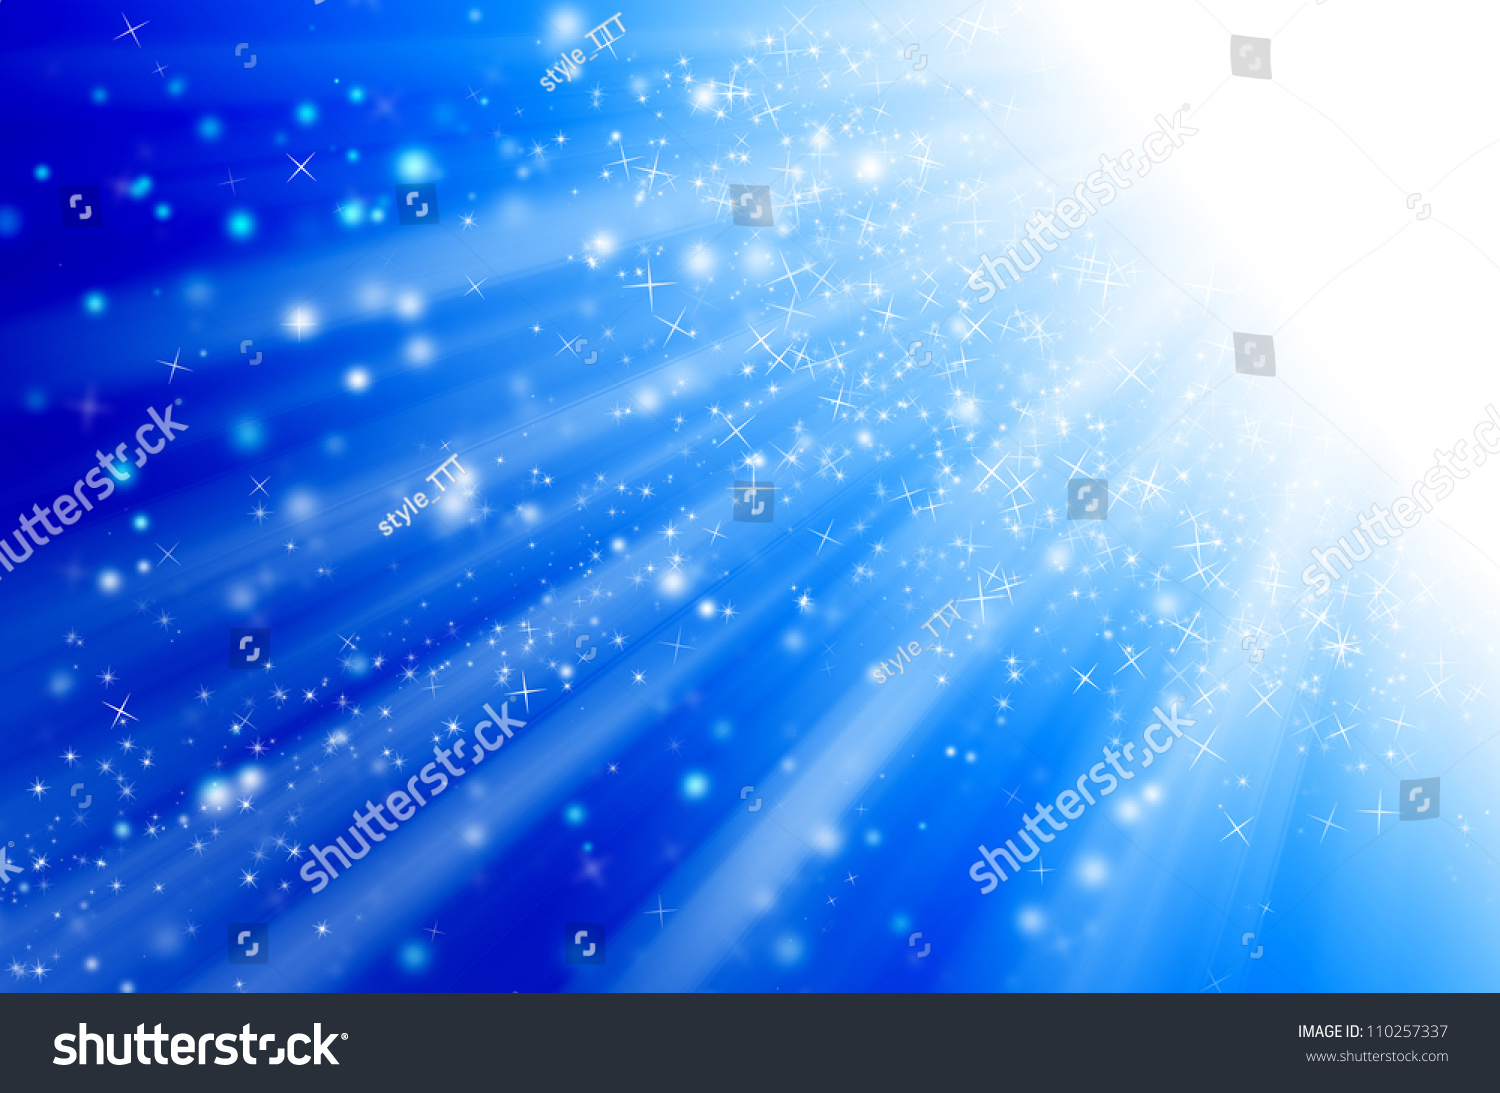 Star Light With Blue Background. Stock Photo 110257337 : Shutterstock